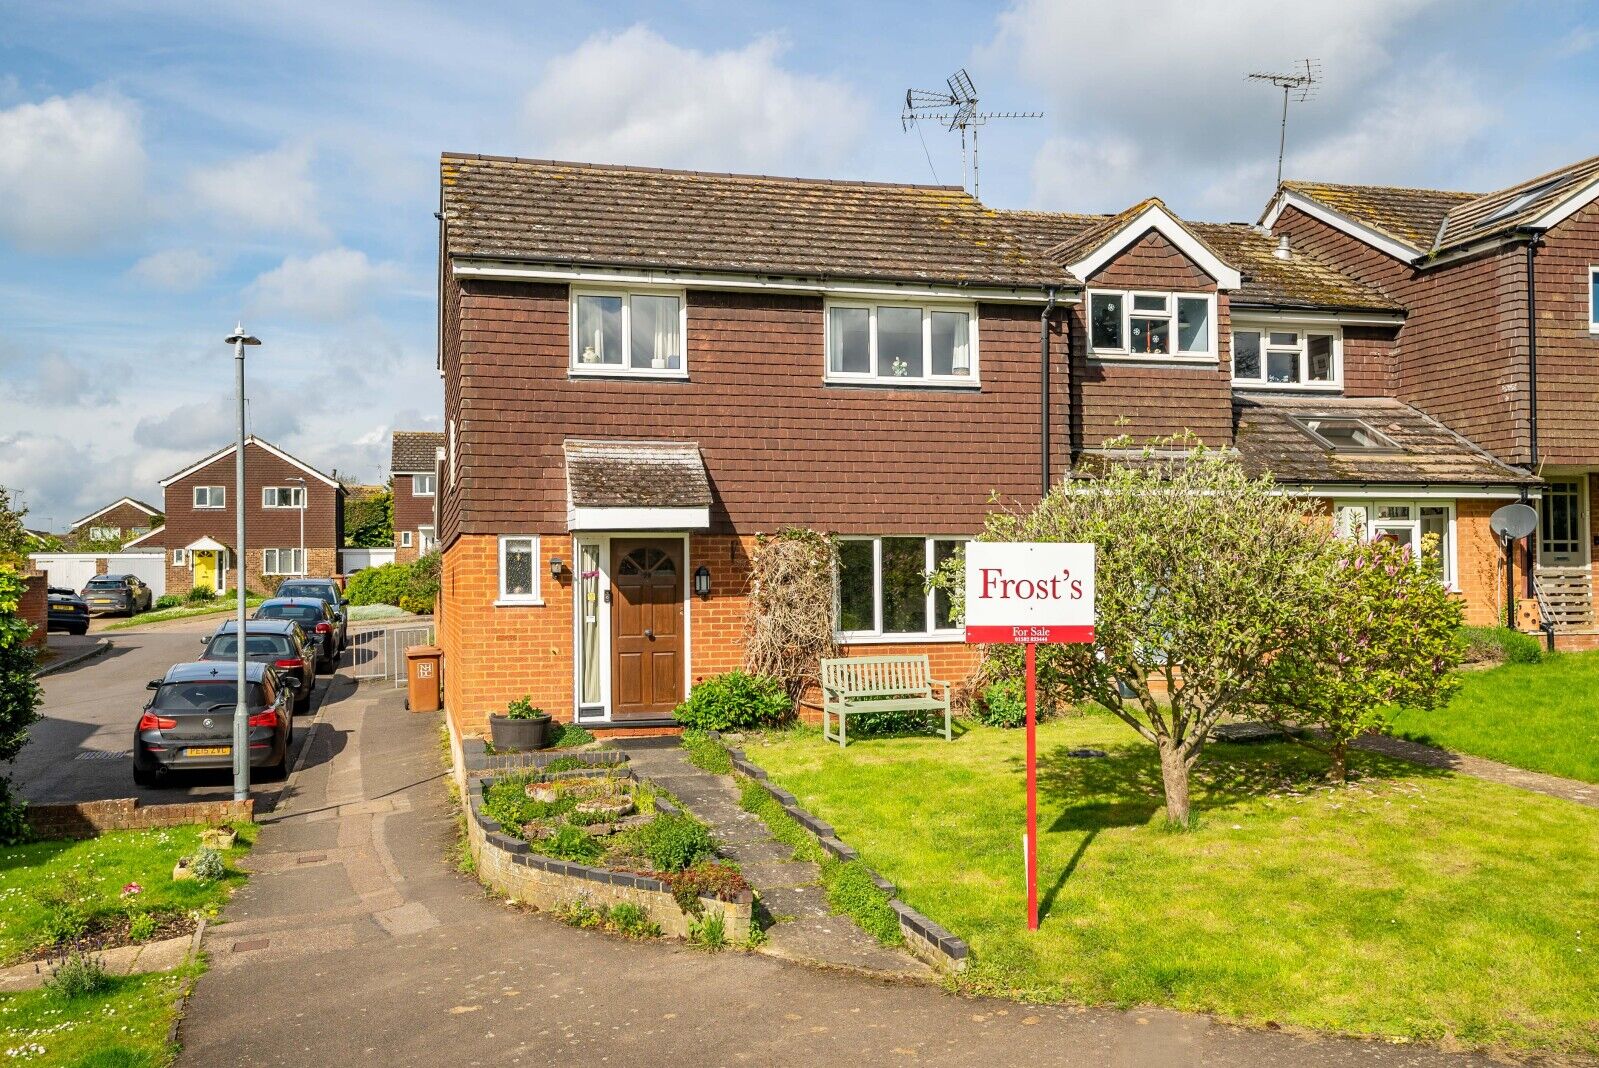 4 bedroom end terraced house for sale Parkfield Crescent, Hitchin, SG4, main image